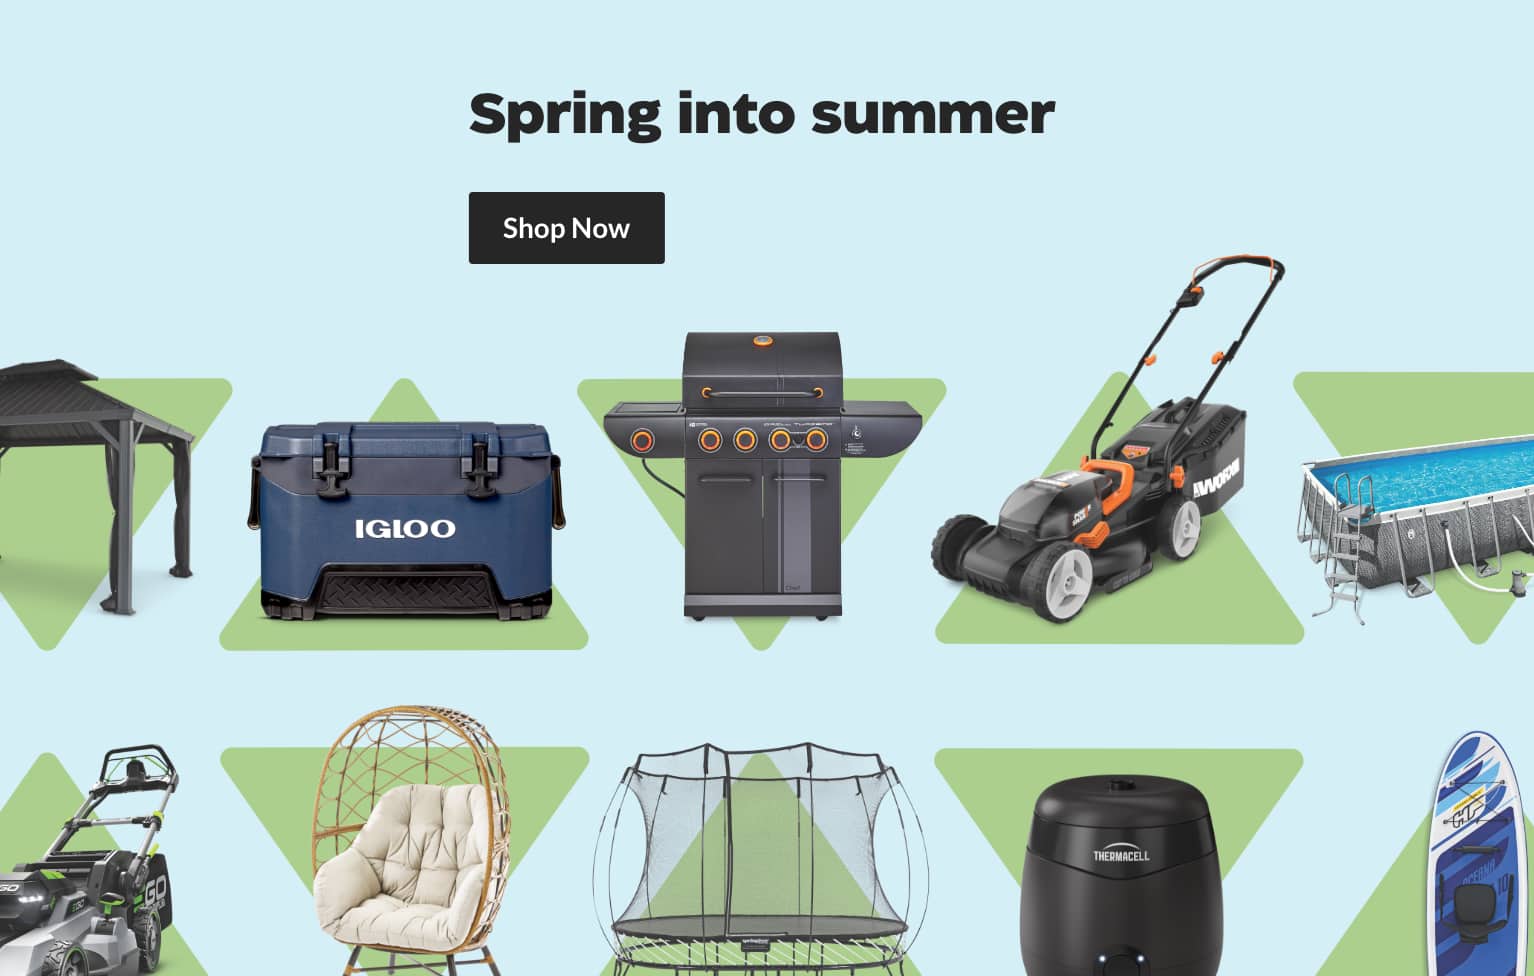 Various summer products including BBQs, pools and camping gear around a “Spring into summer” title.